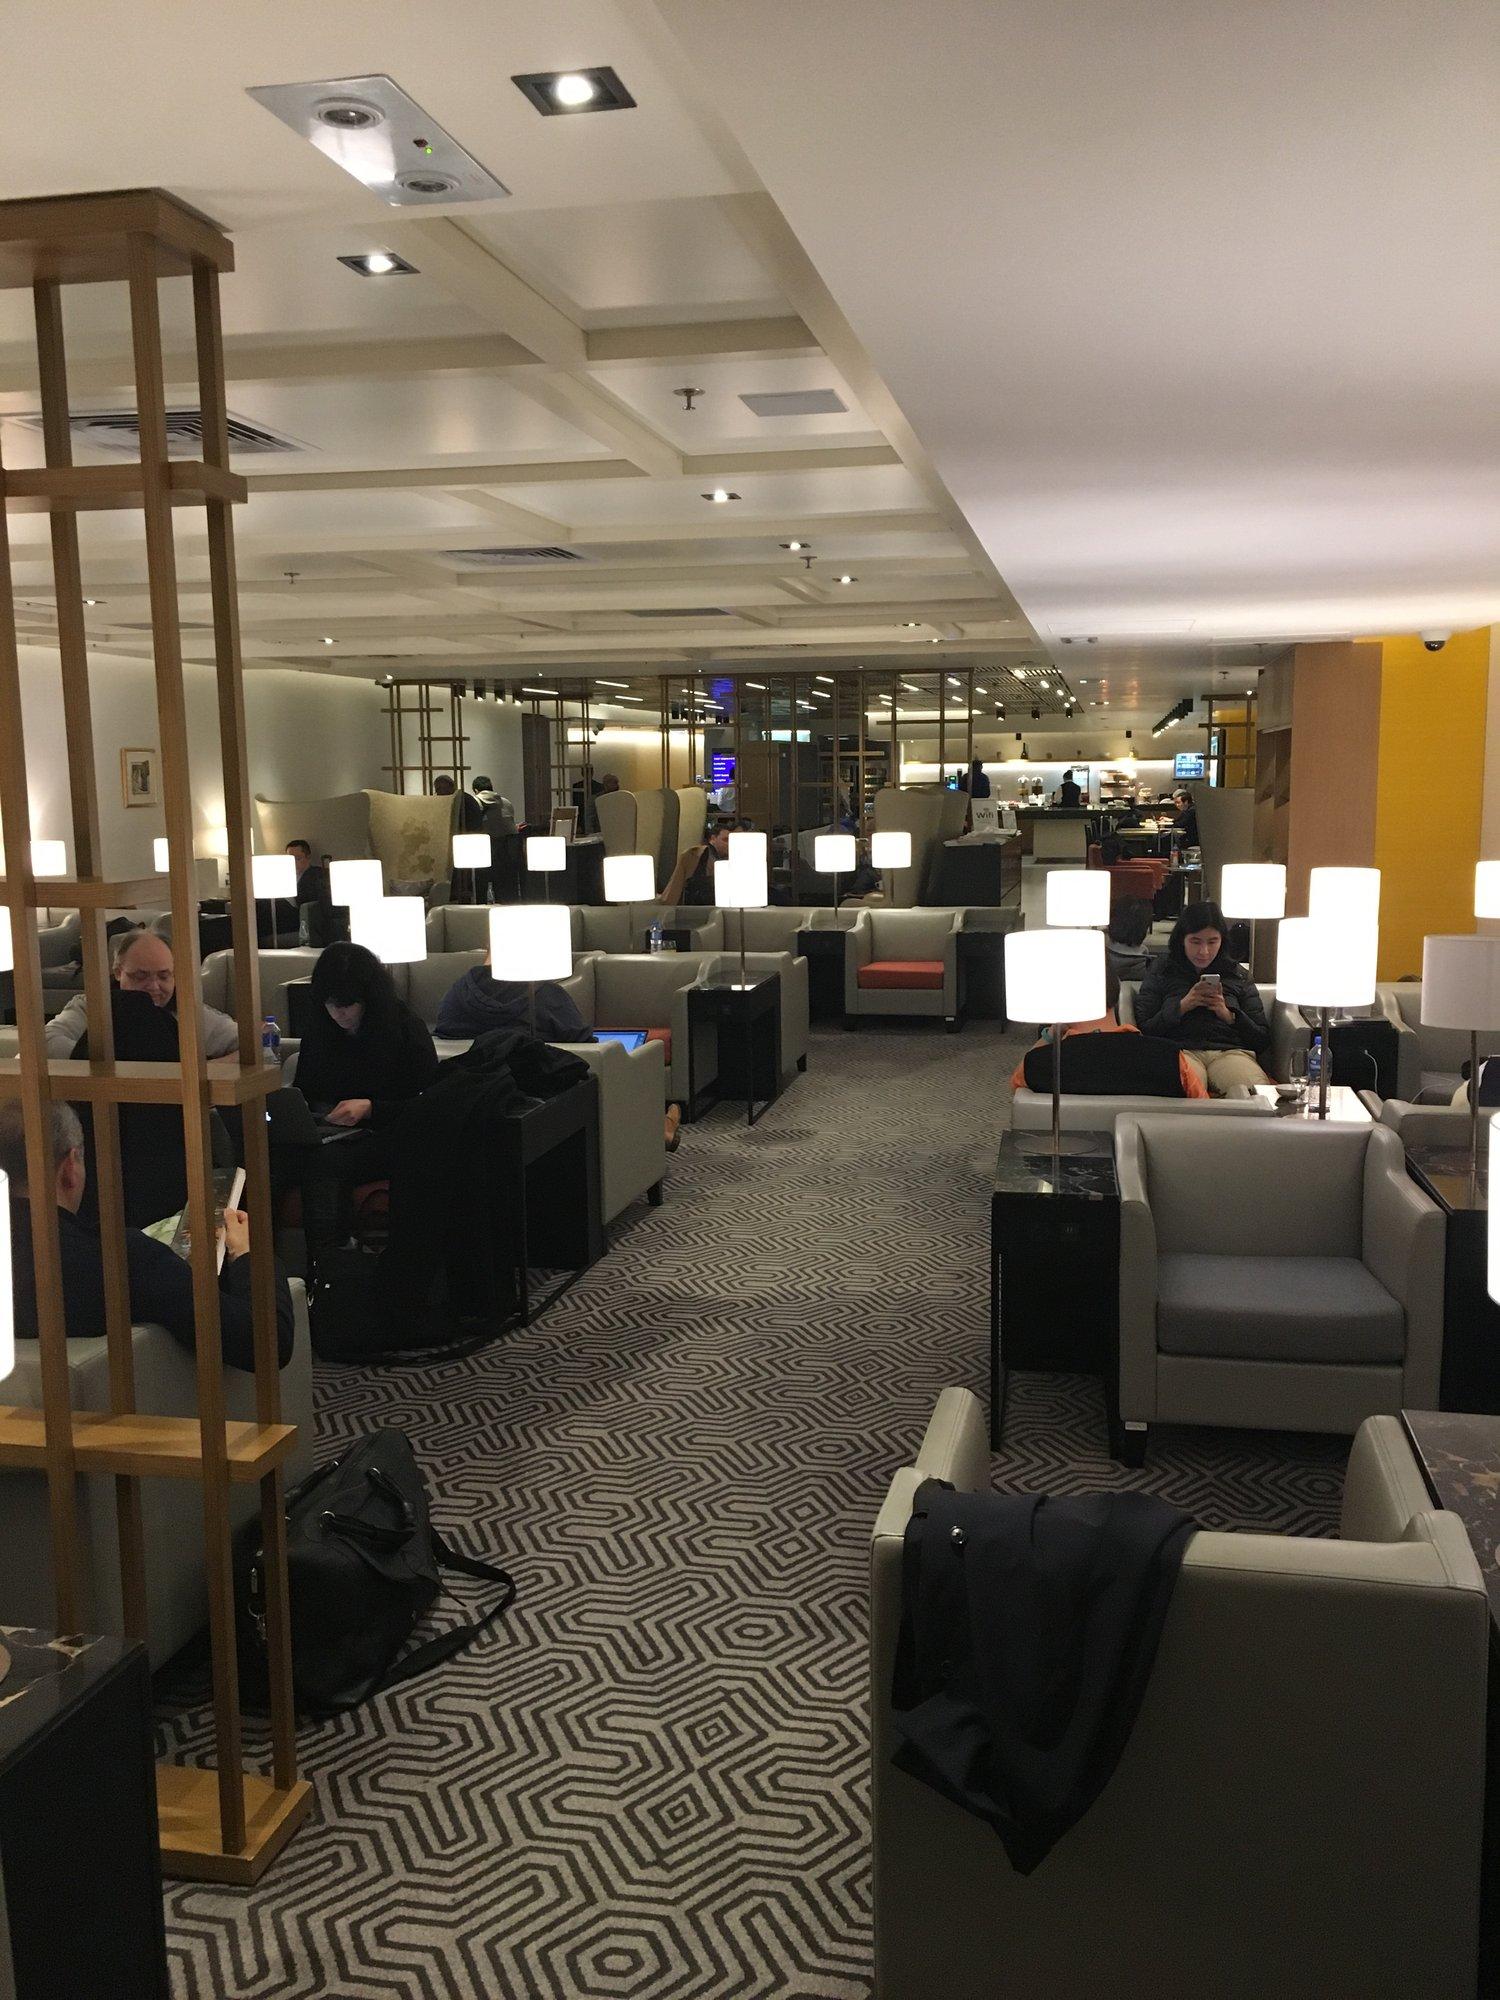 Singapore Airlines SilverKris Business Class Lounge image 41 of 68